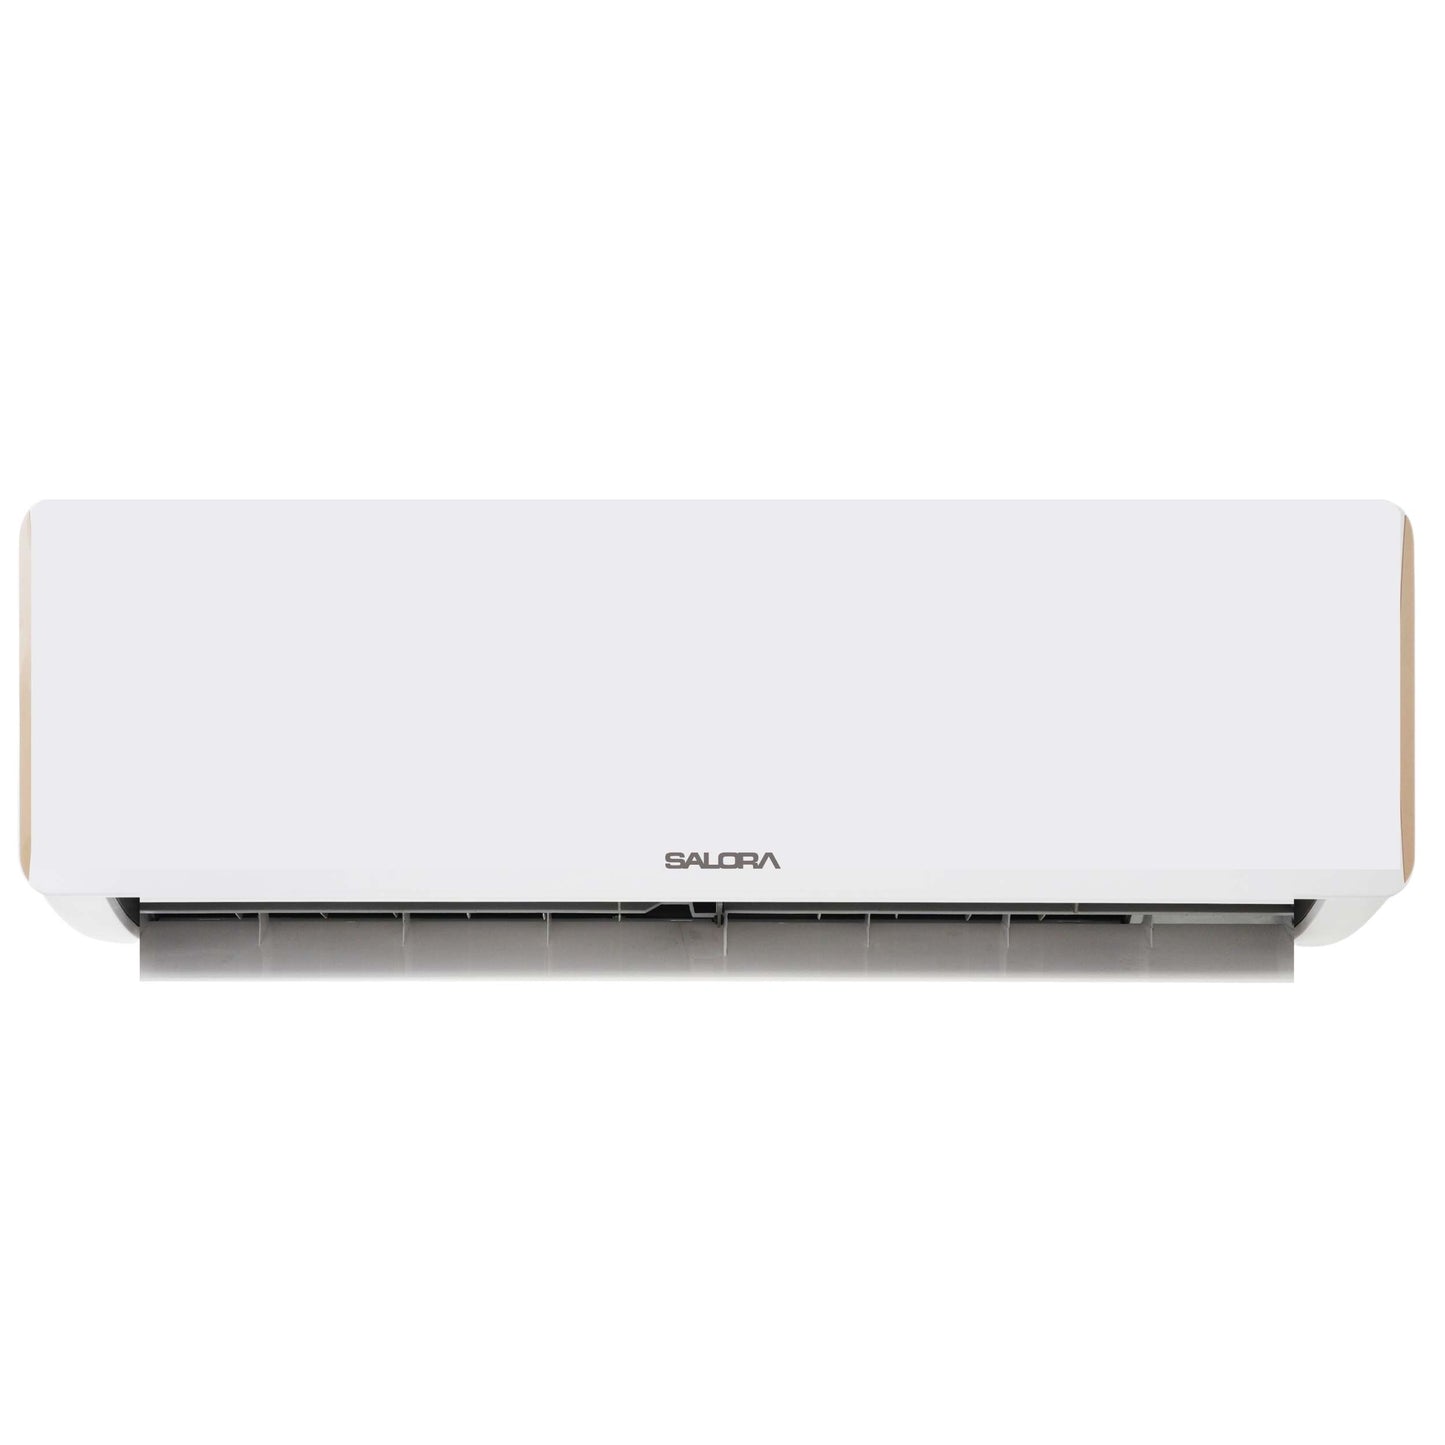 Salora 1.5 Ton 3.85 Star, 4-in-1 Convertible, Inverter Split AC (Copper, Heavy-Duty Cooling at 52 Degree Celsius, SSI18CU3YBEG, White)